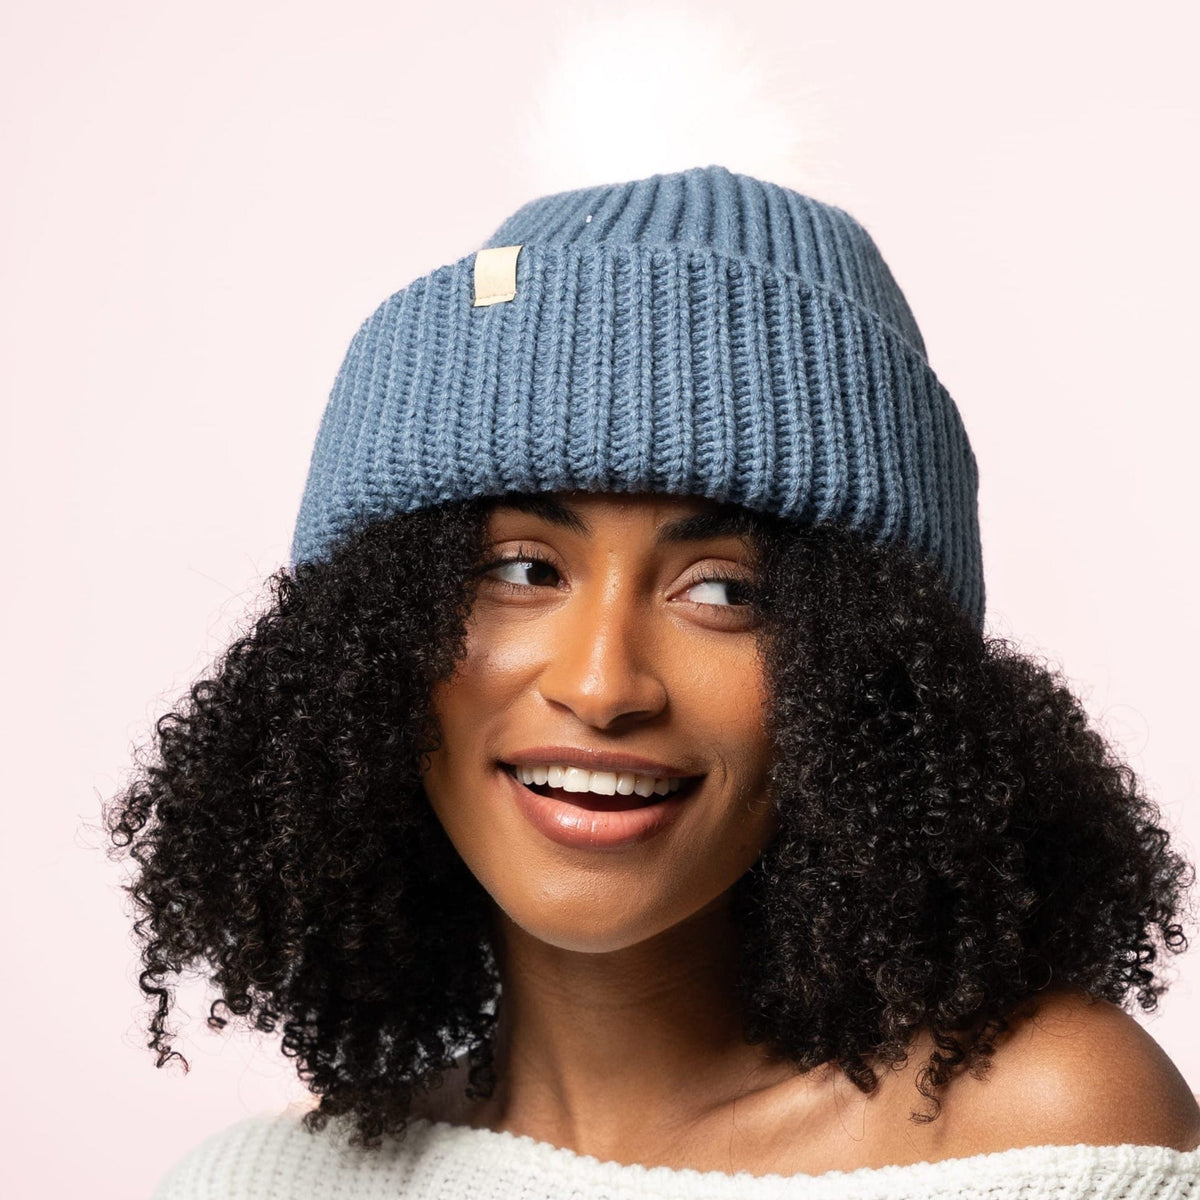 Only Curls Chunky Satin Lined Beanie - Dusty Blue with Pom Pom - Only Curls